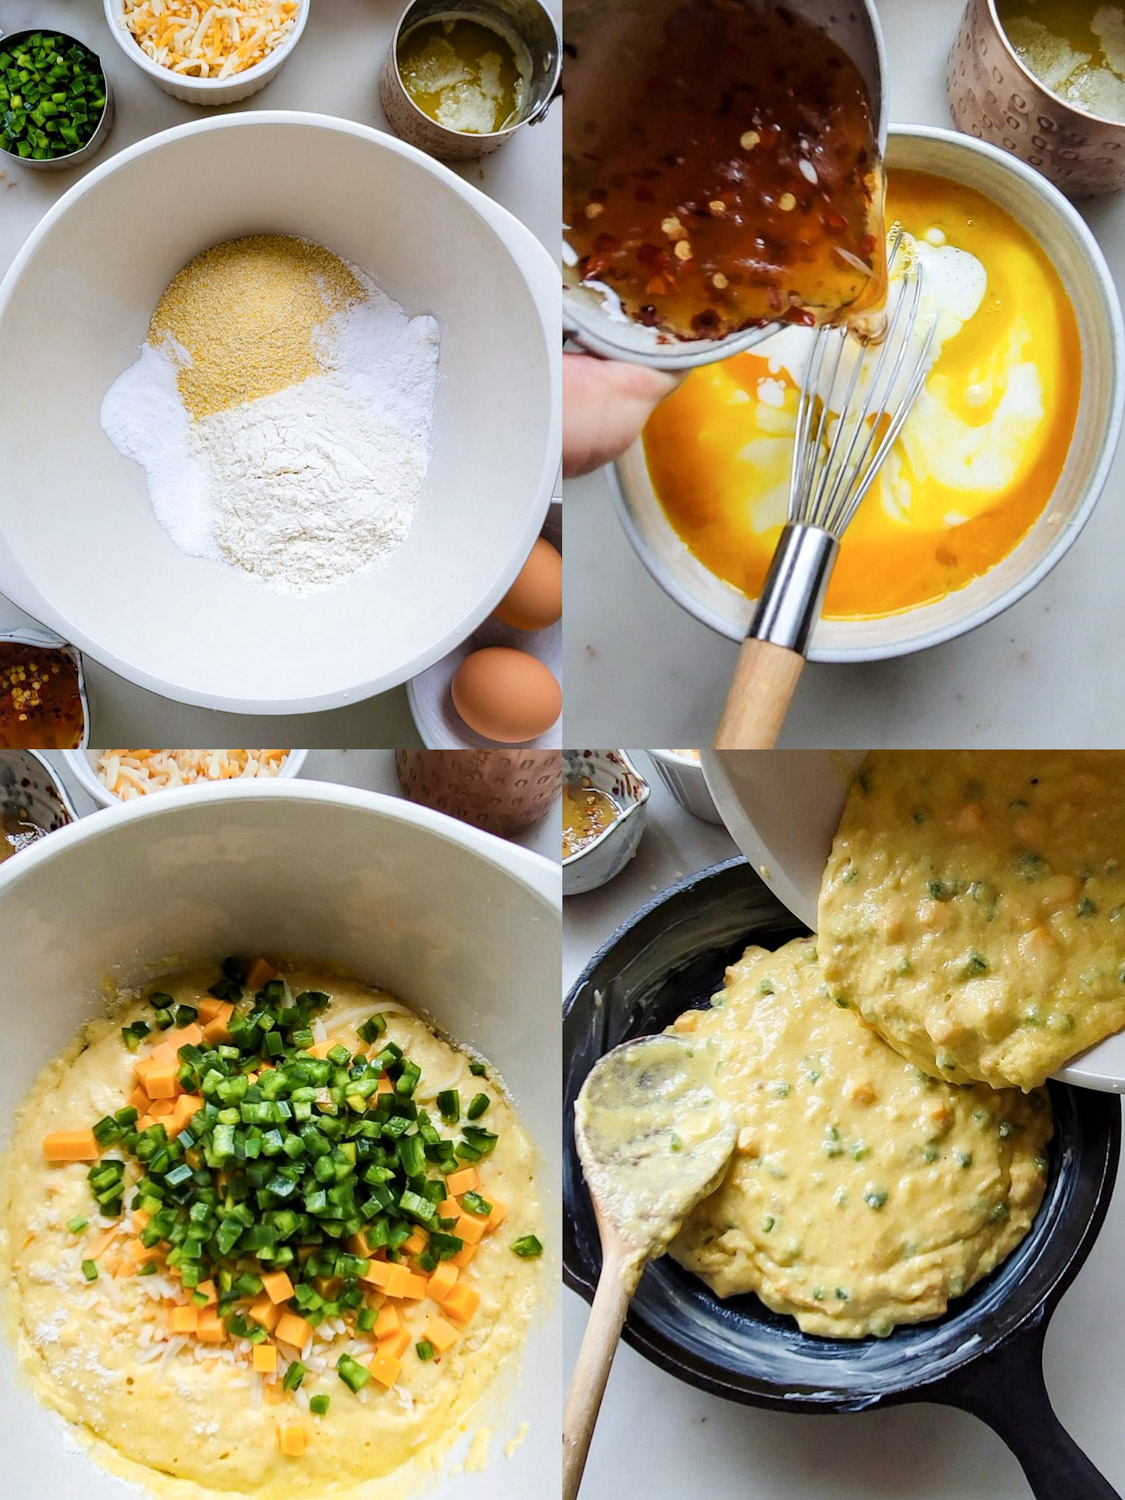 Collage showing the stages of making Jalapeno Cheddar Cornbread with Hot Honey